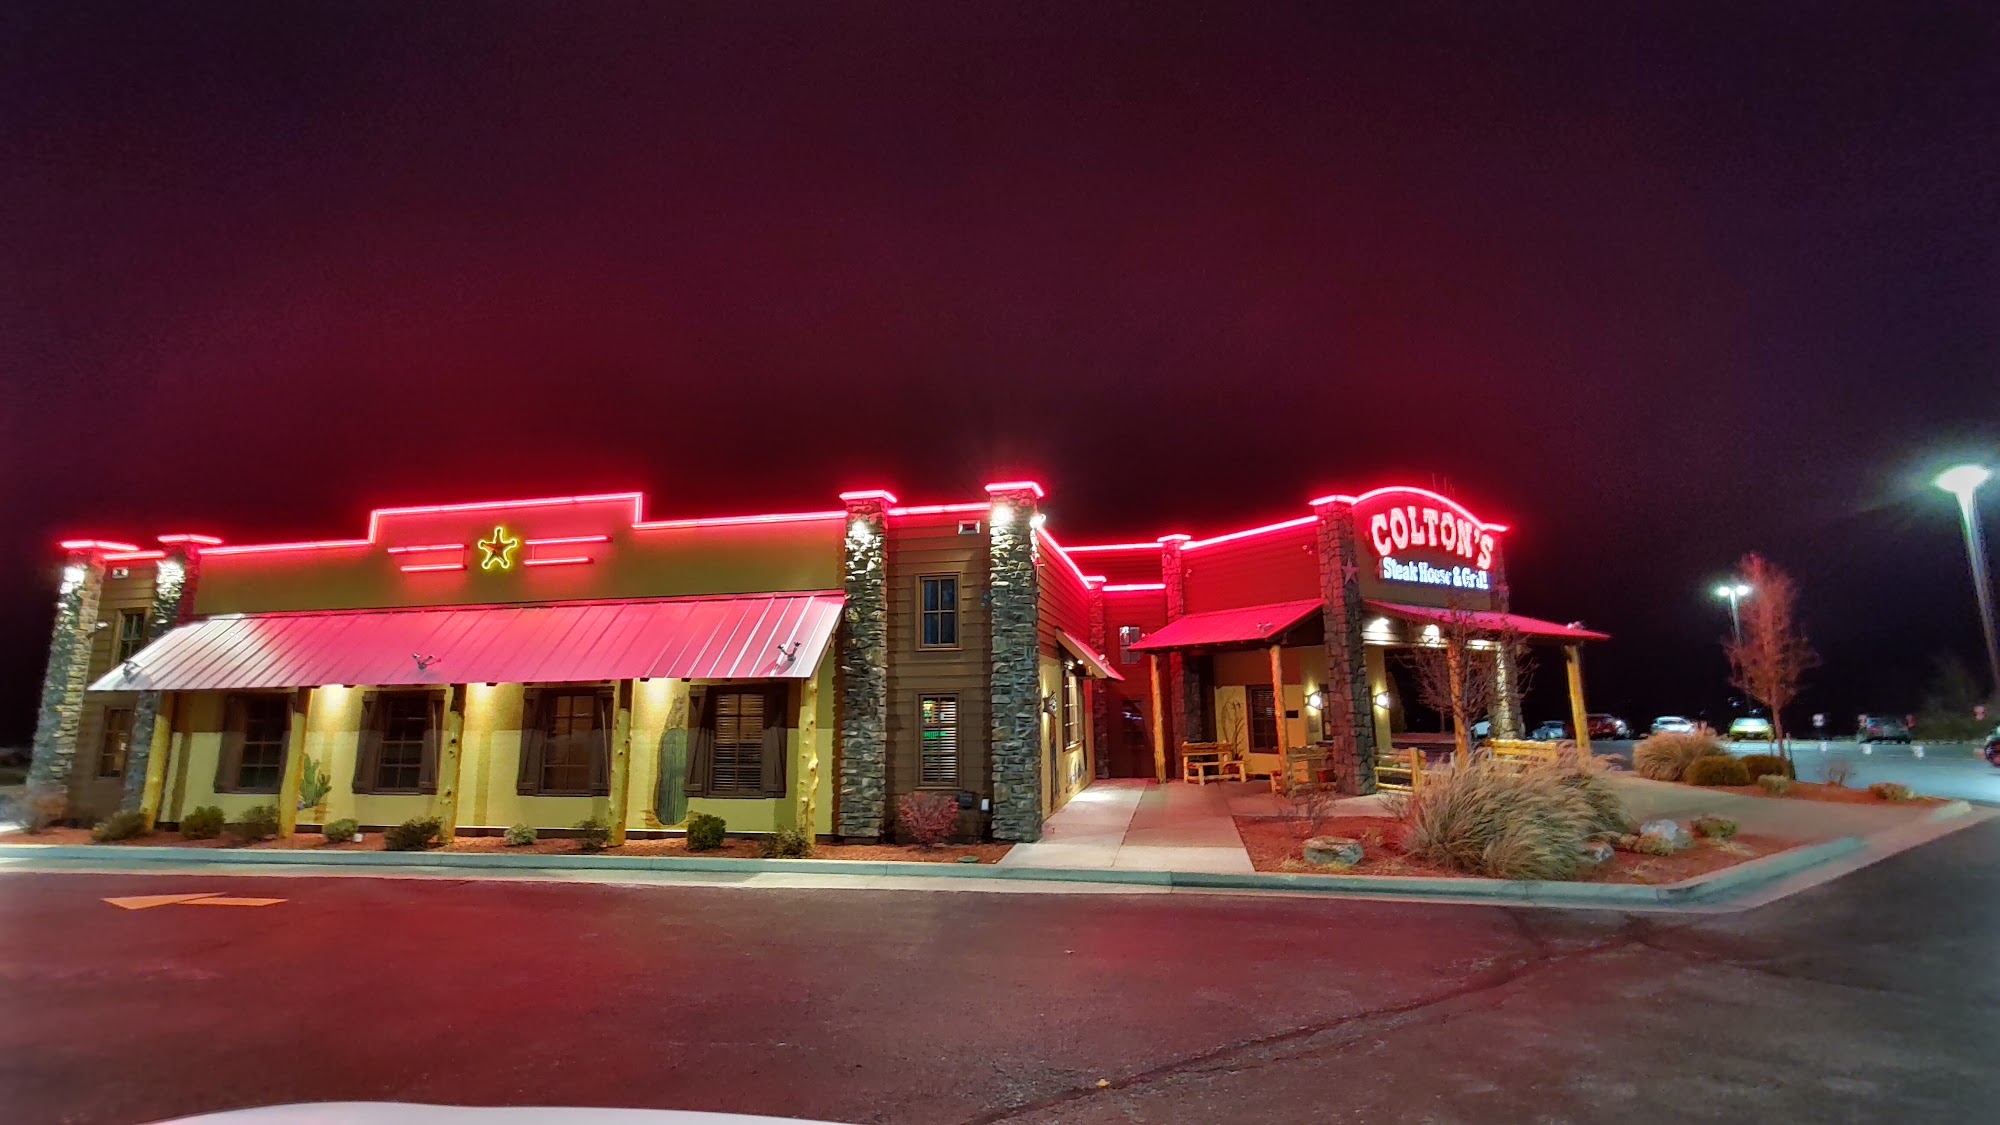 Colton's Steak House & Grill of Rolla, MO